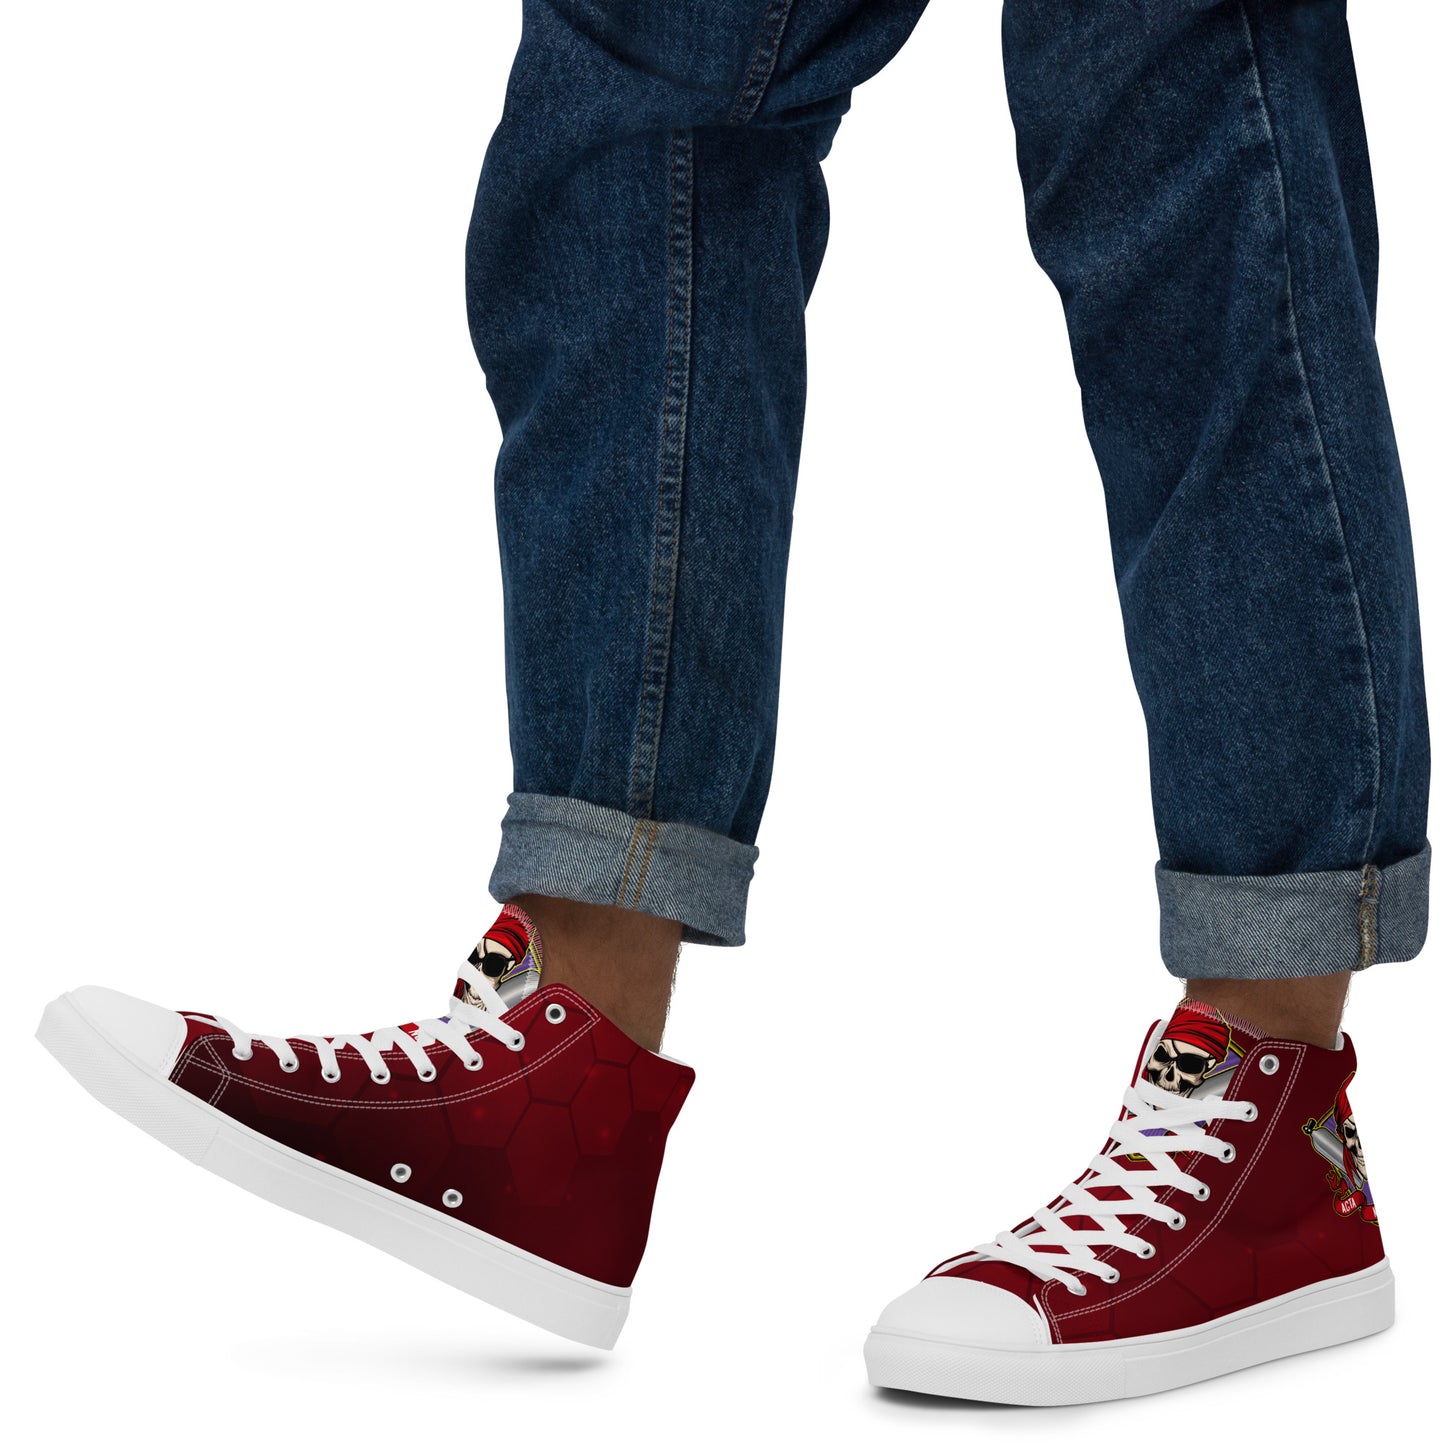 Men’s Custom Scuba High Top Canvas Shoes - Rum Punch Red